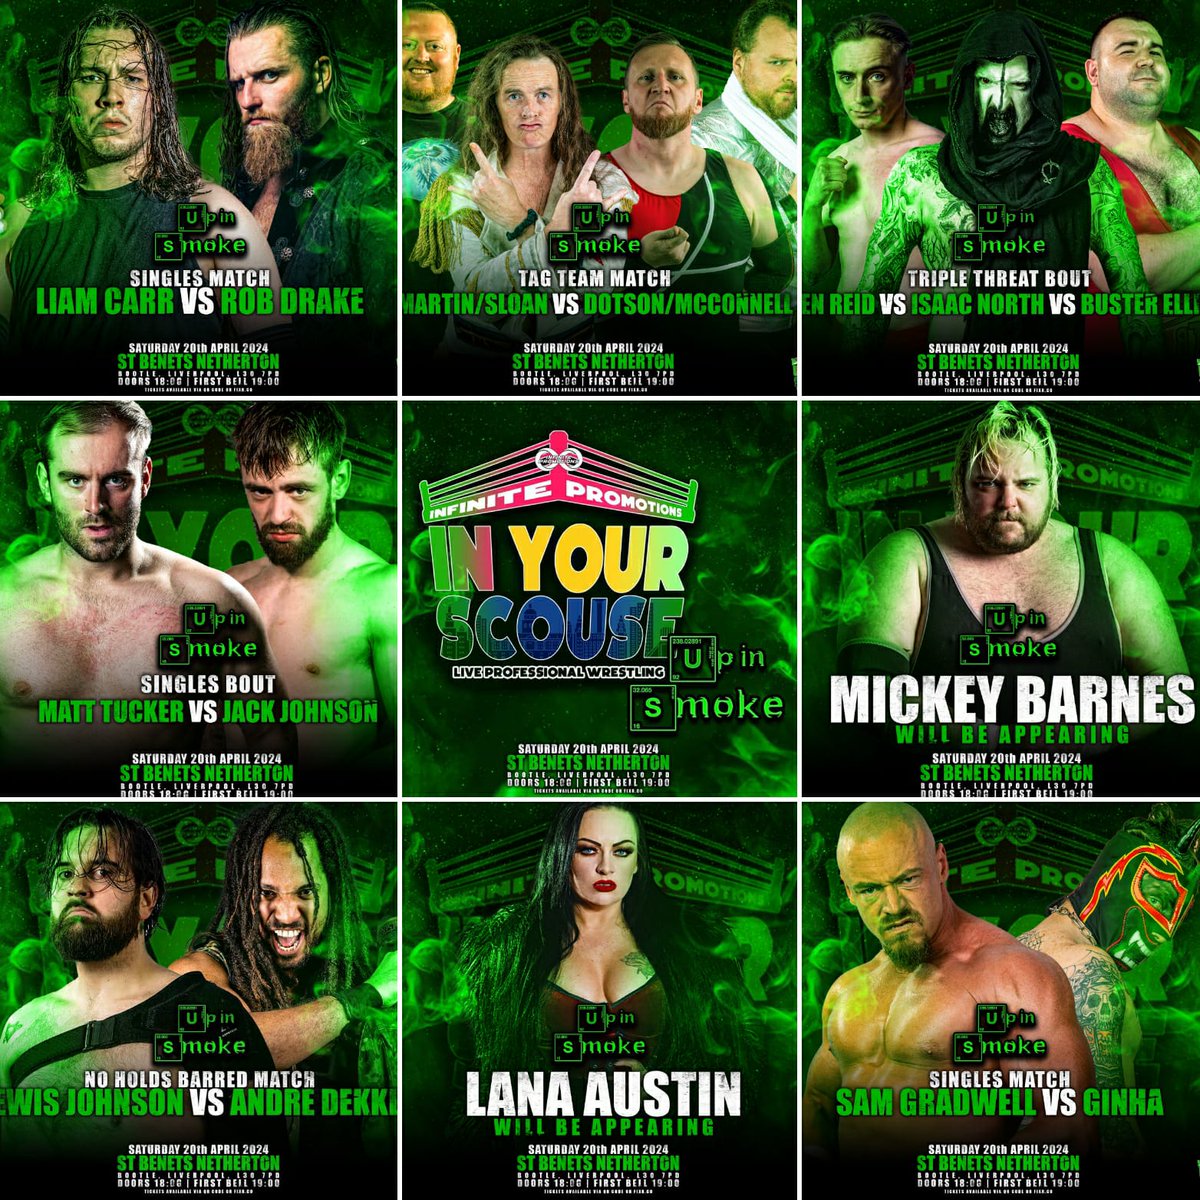 Look at this belter card at @Infinite_Promo tonight.
Gonna take some ear plugs in case @Lana_Austin1 decides to try to sing though.